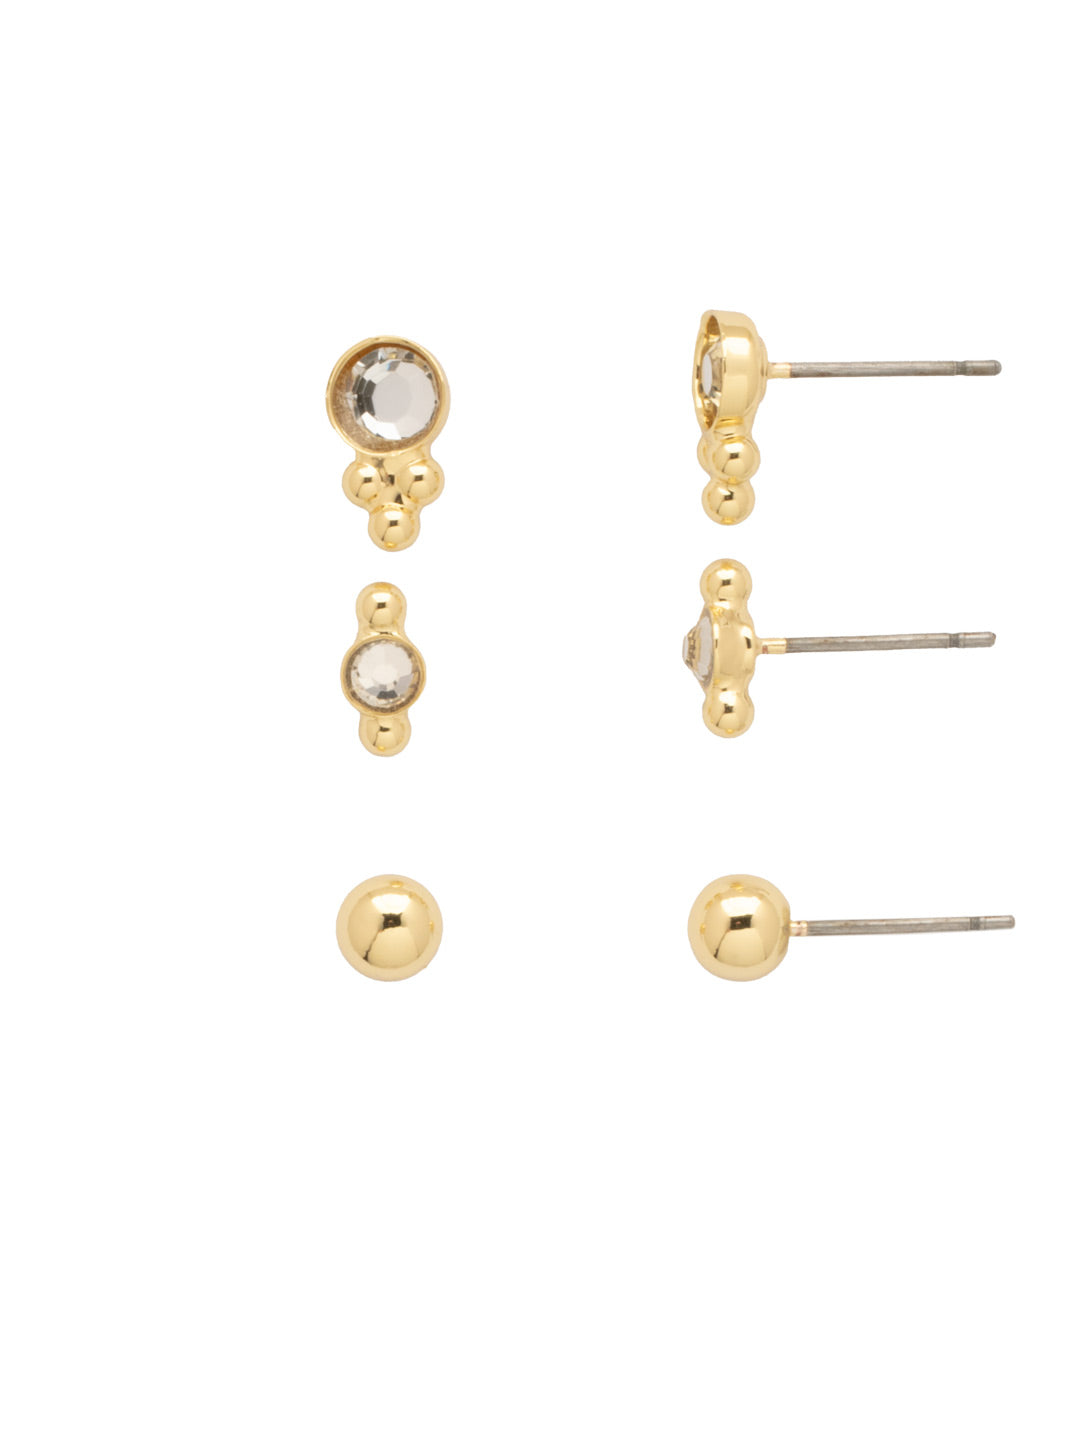 Trifecta Earring Gift Set - GDH6BGCRY - <p>The Trifecta Earring Gift Set is everything you could want - three sets of earrings that are sized perfectly to wear together! From Sorrelli's Crystal collection in our Bright Gold-tone finish.</p>